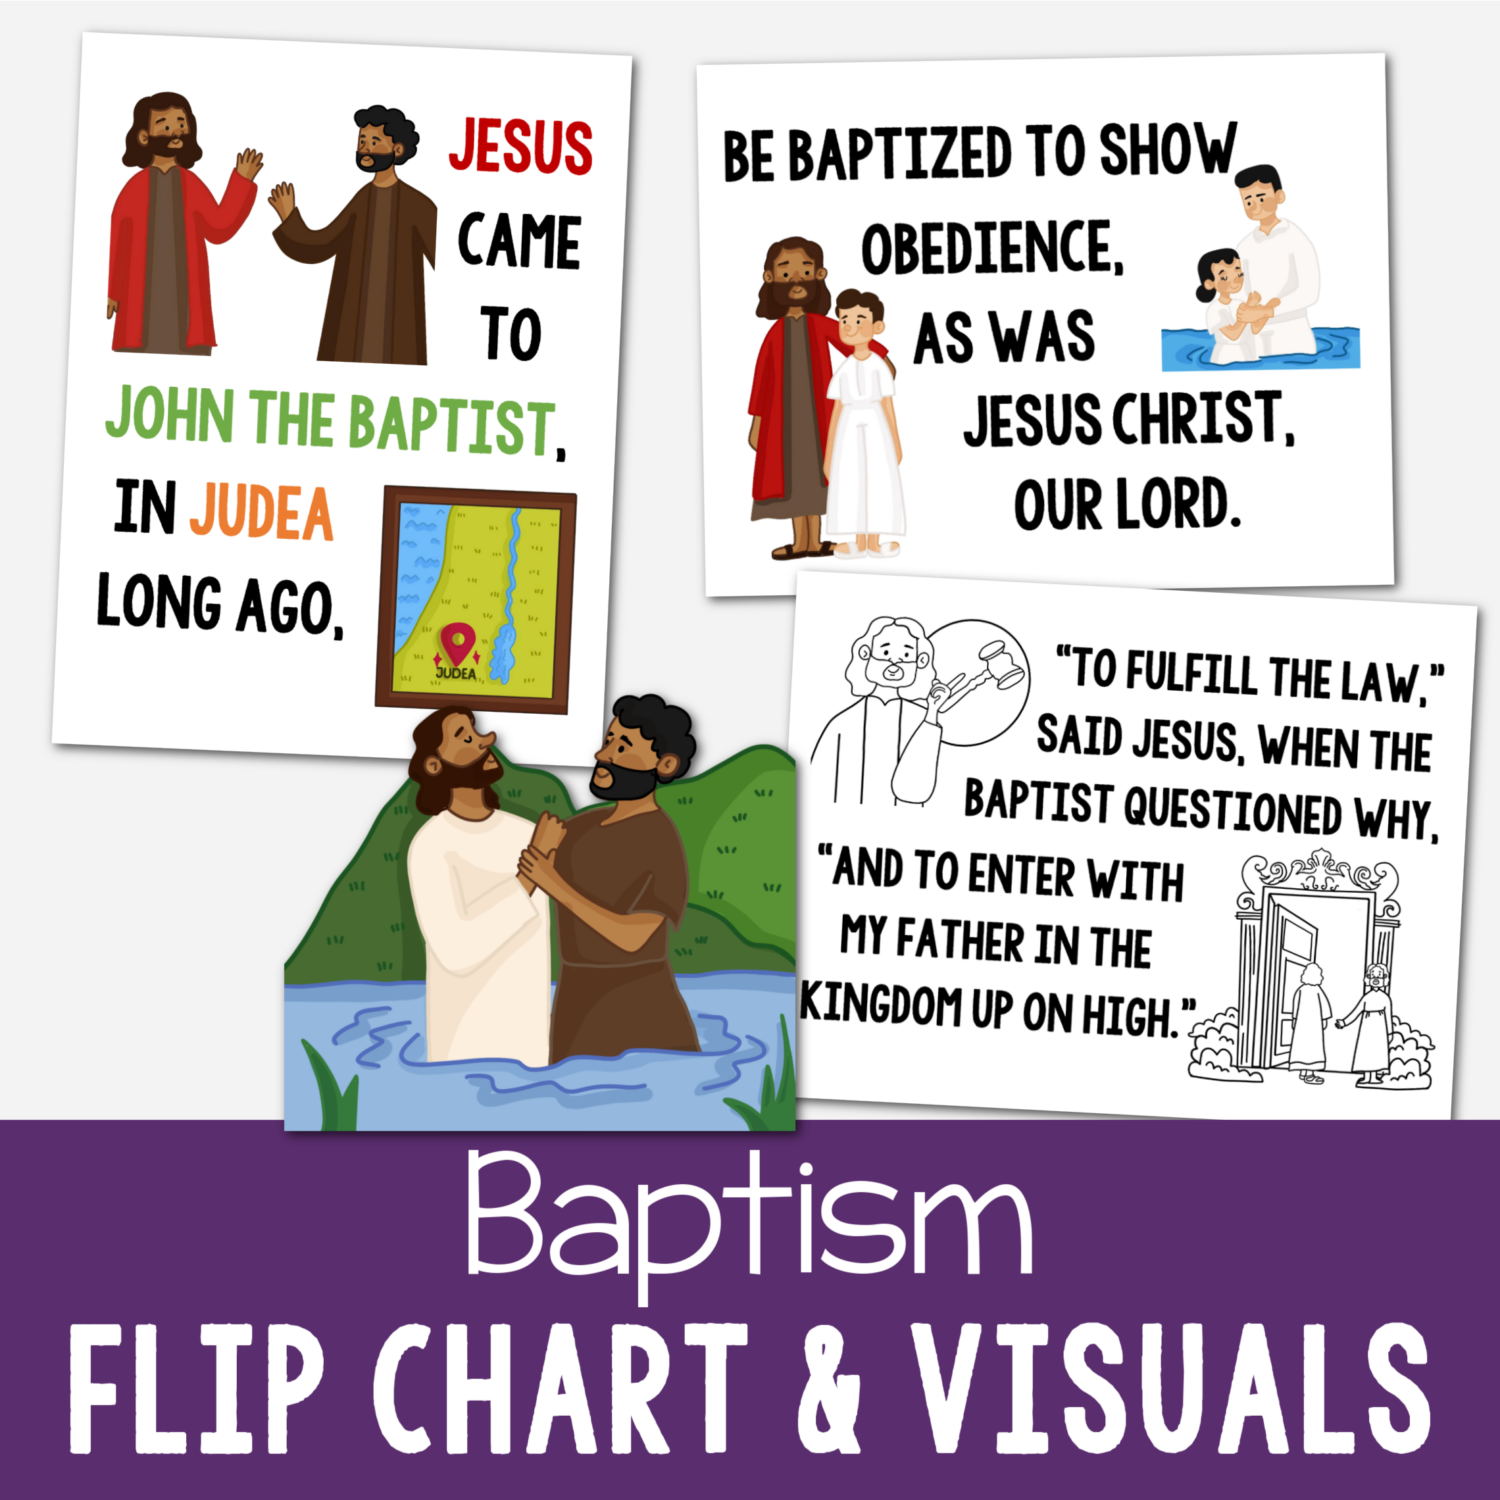 Baptism Flip Chart LDS Primary Song visual aids PDF printable and slideshow options for singing time Primary music leaders!